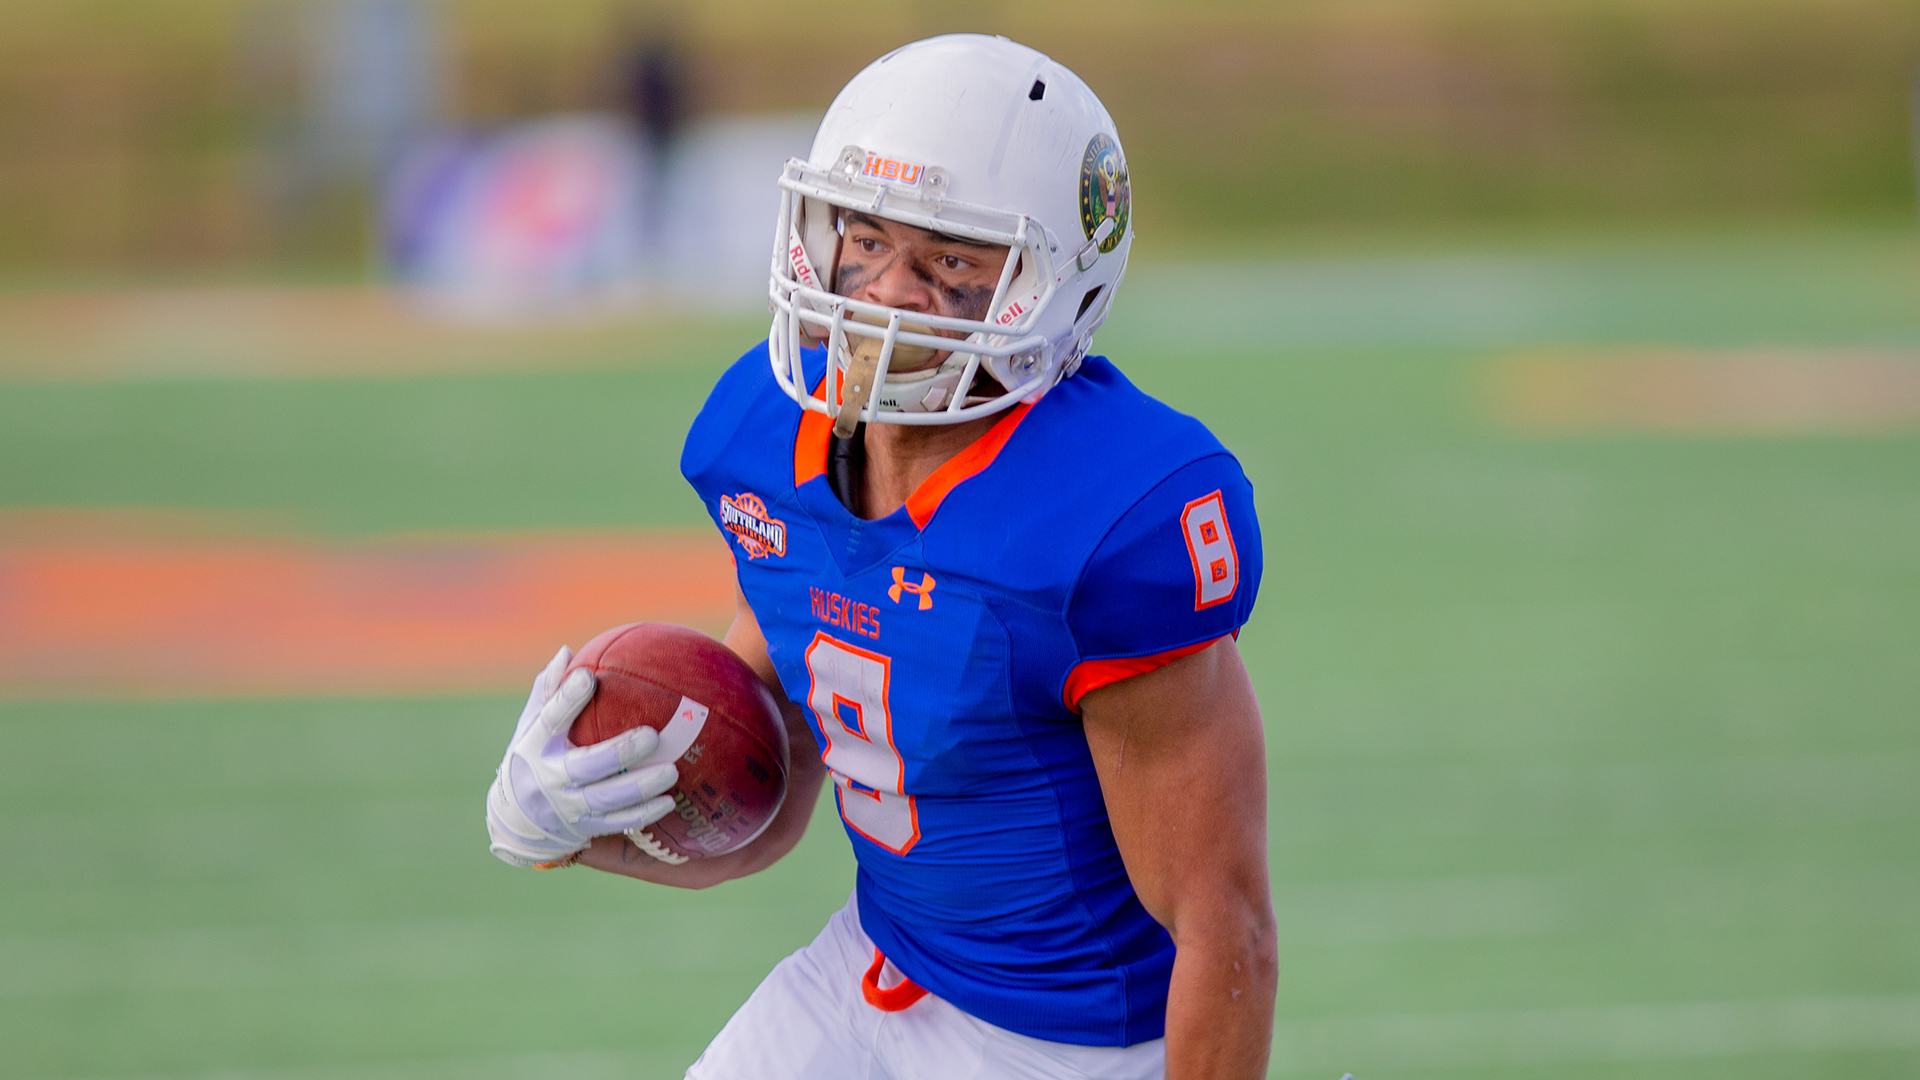 Houston Baptist wide receiver Jerreth Sterns is a ball magnet, catching nearly nine passes per game in 2019. He could provide tremendous DFS value on Saturday. (Image: Houston Baptist University Athletics)